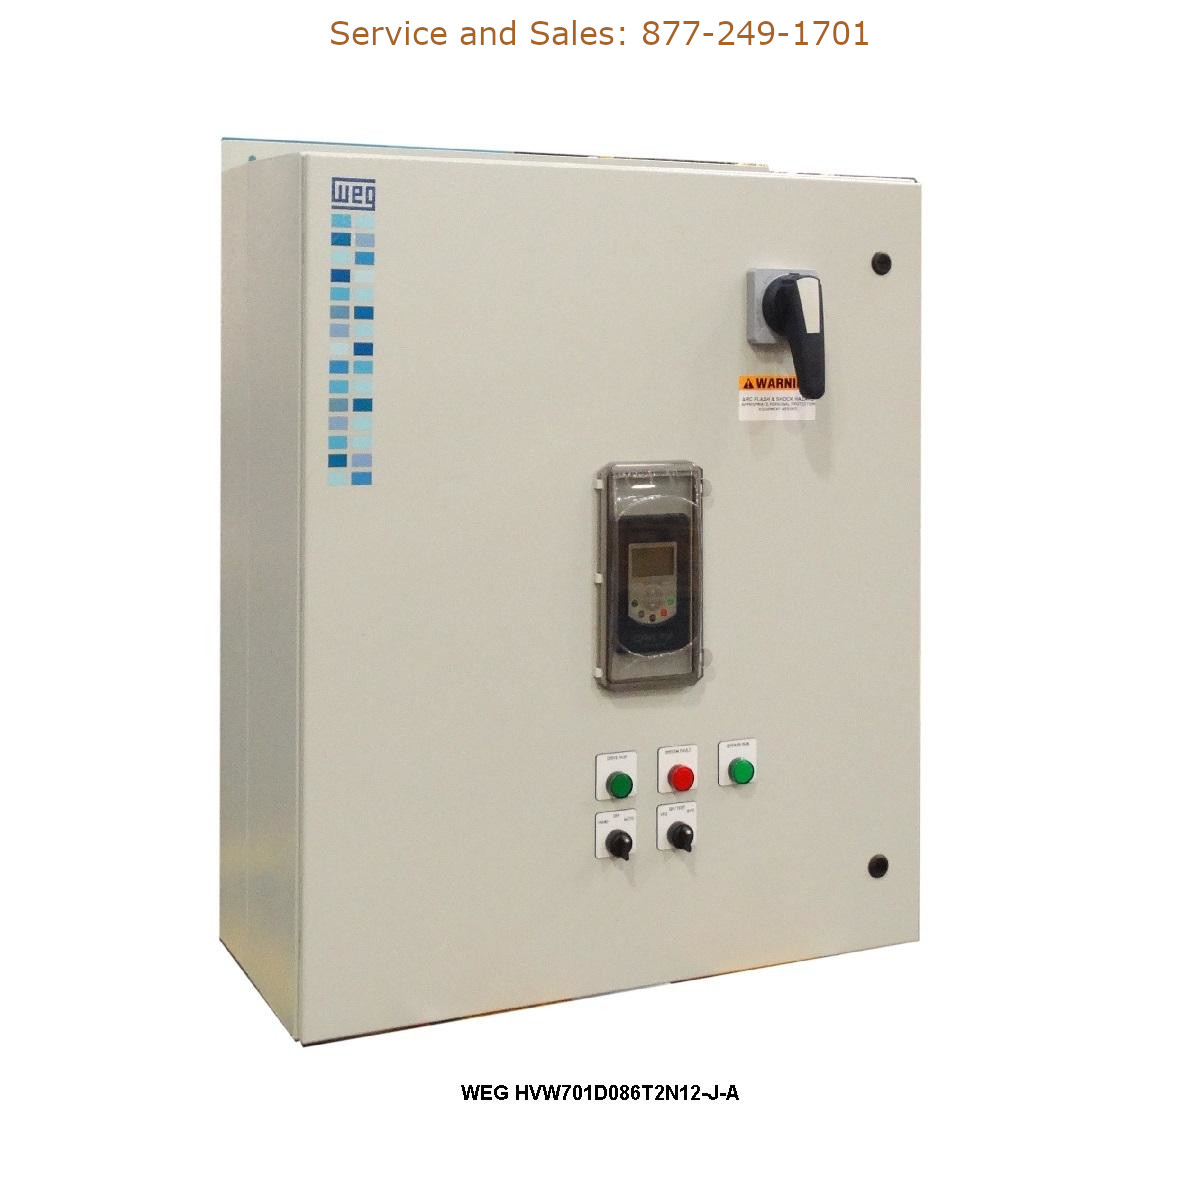 WEG HVW701D086T2N12-J-A WEG Model Number HVW701D086T2N12-J-A WEG Drives, Variable Speed Drives Repair Service, Troubleshooting, Replacement Parts https://gesrepair.com/wp-content/uploads/2022/WEG/WEG_HVW701D086T2N12-J-A_Drives_Variable_Speed_Drives.jpg